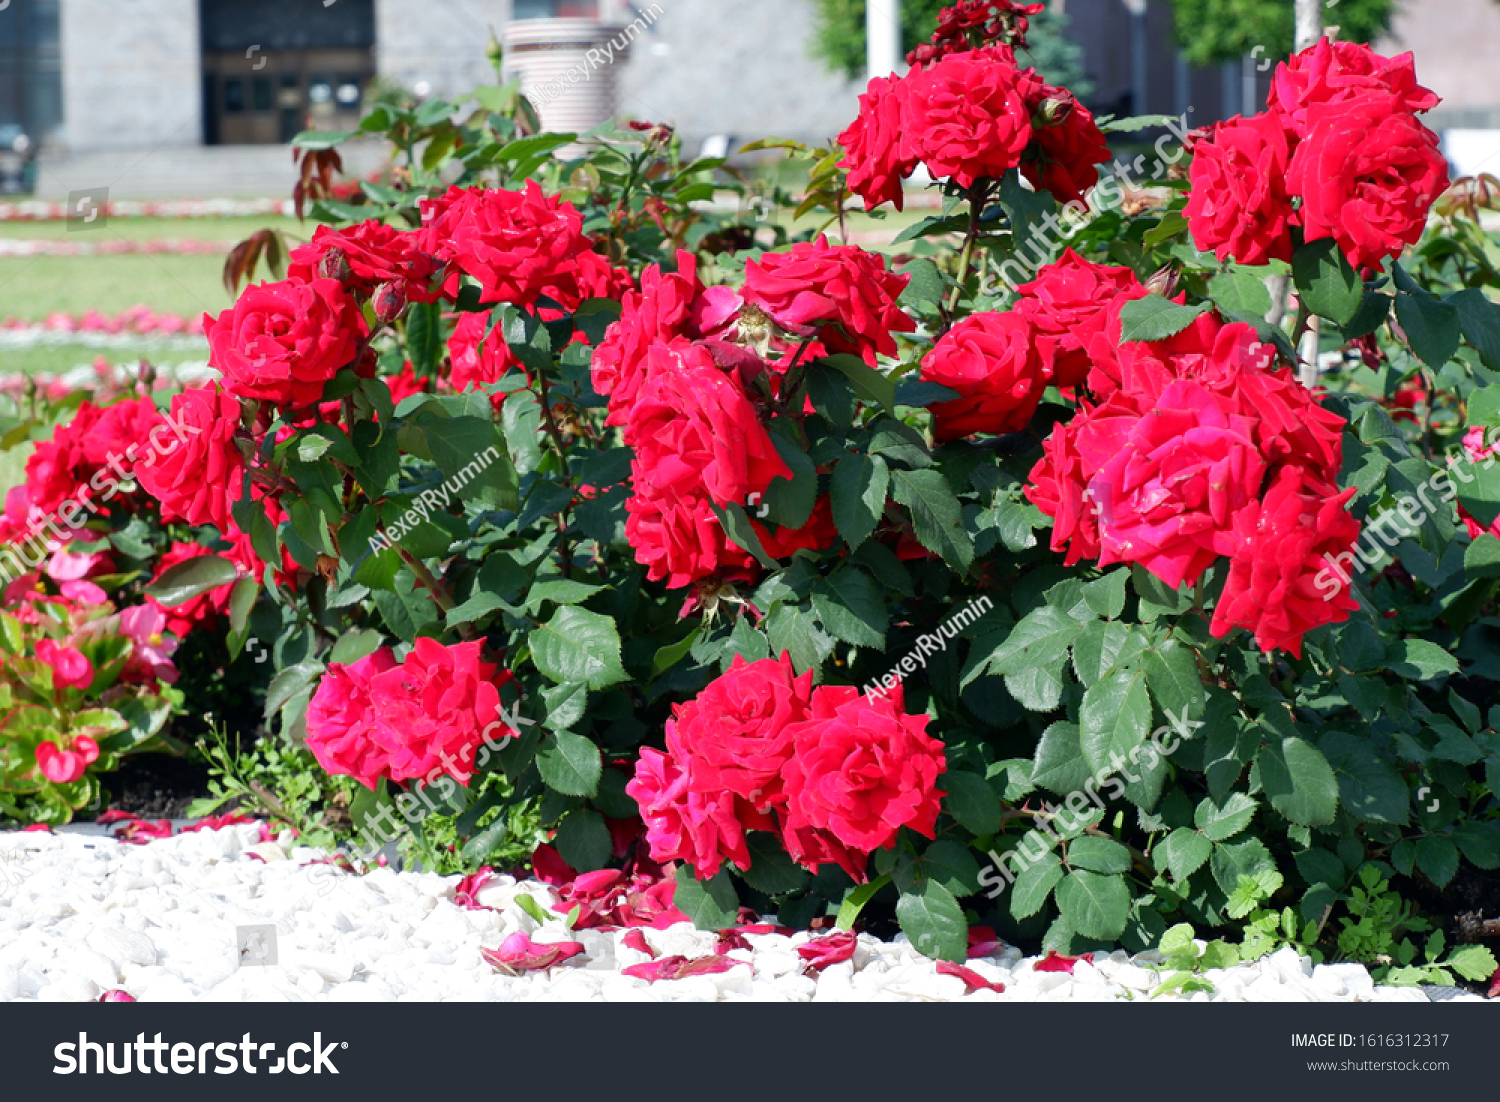 Several fresh red blooming roses on rose bush close up view